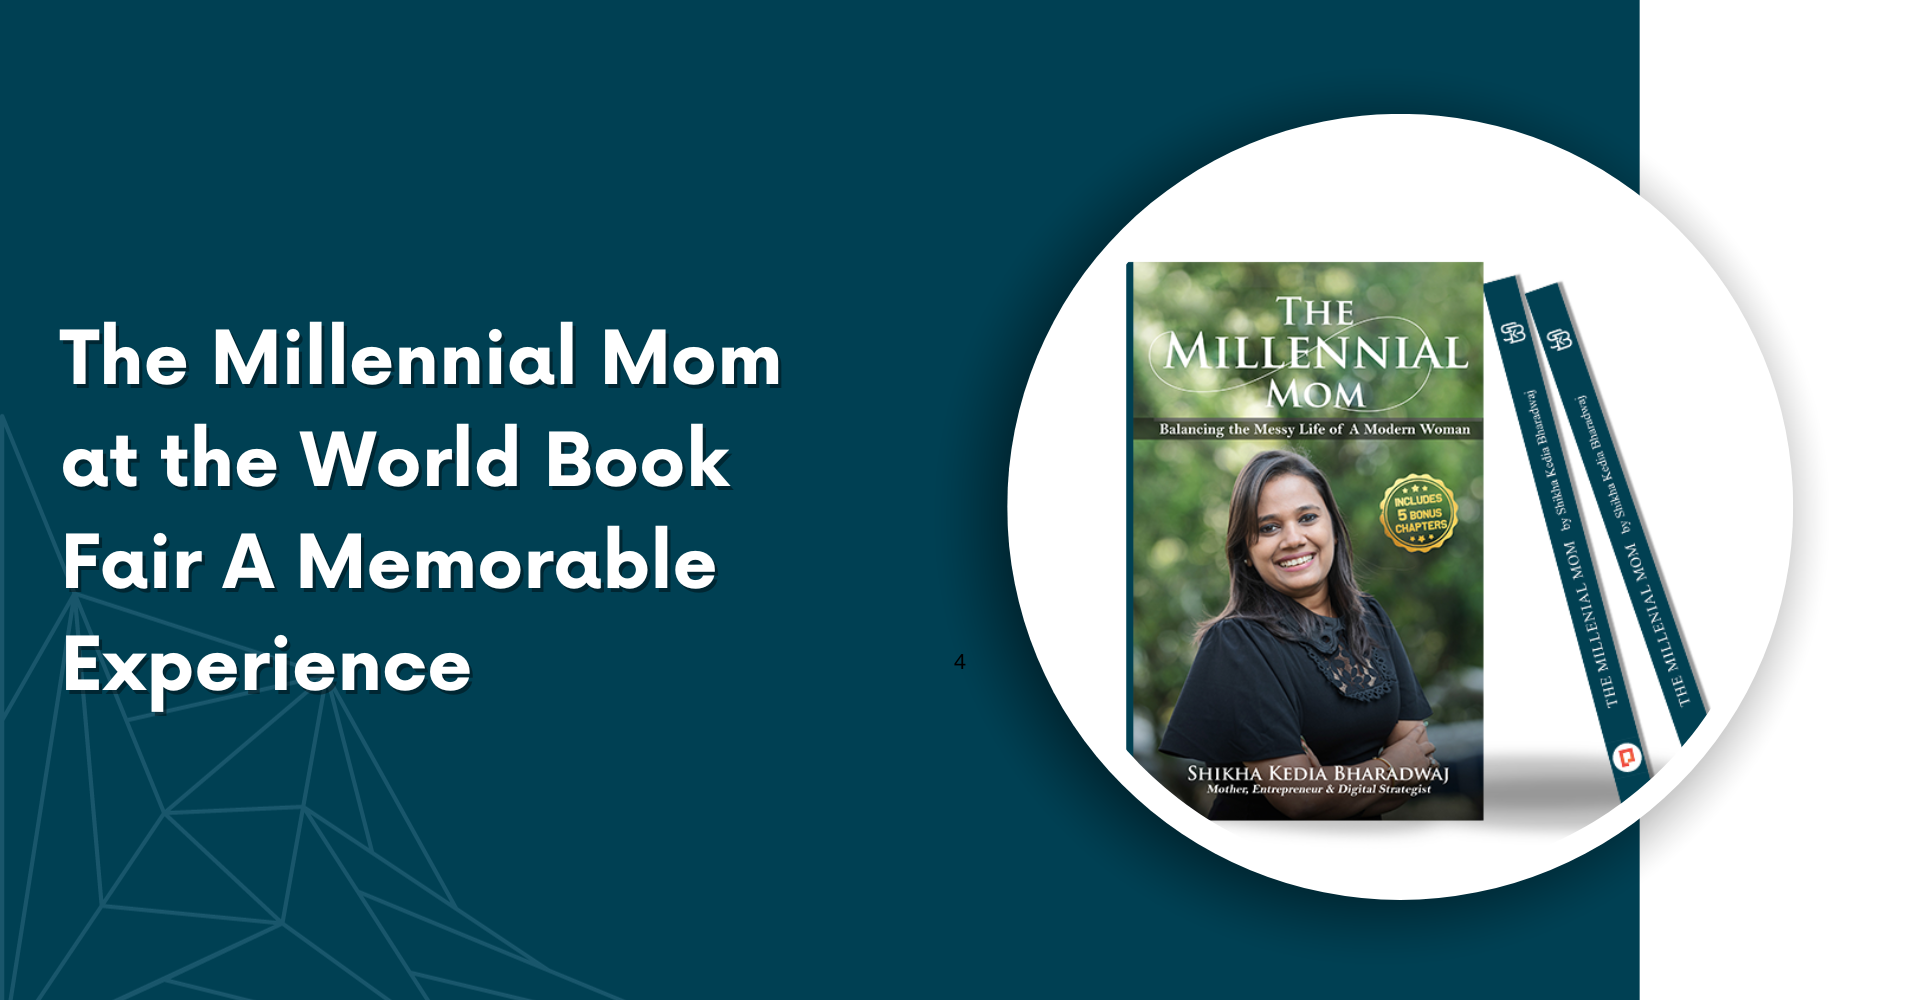 The Millennial Mom at the World Book Fair A Memorable Experience